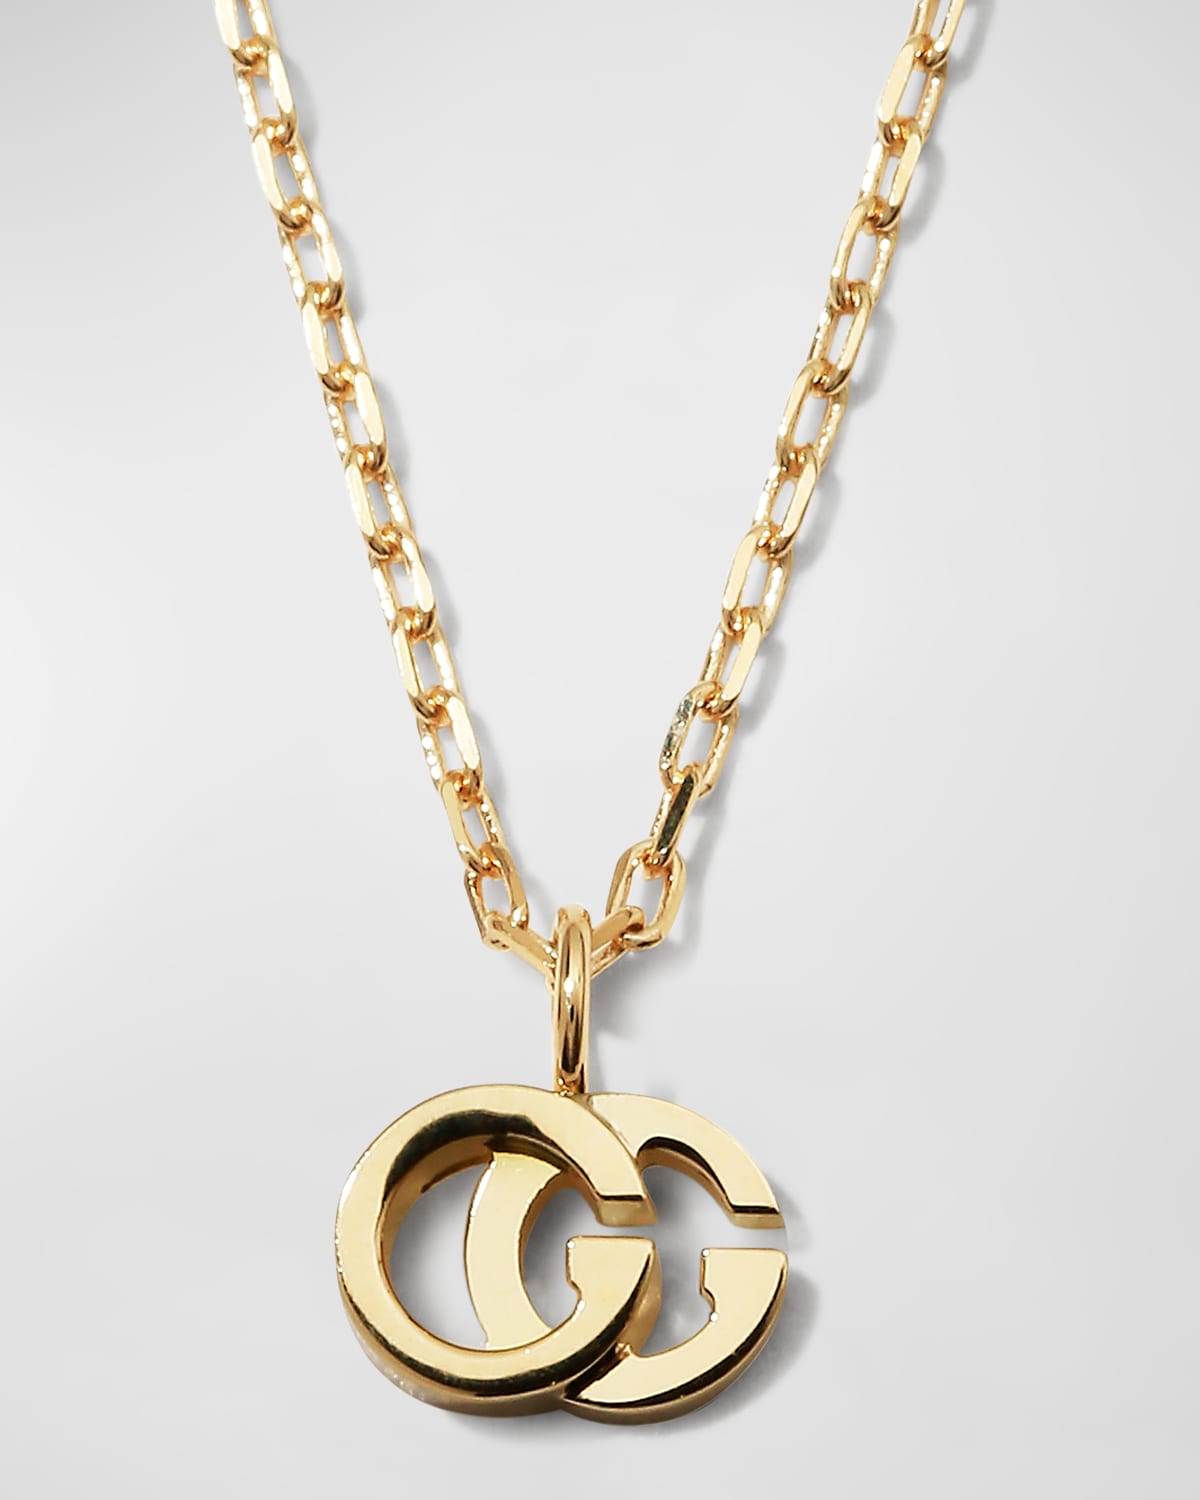 Gucci 18k Gold Gg Running Necklace W/ Topaz